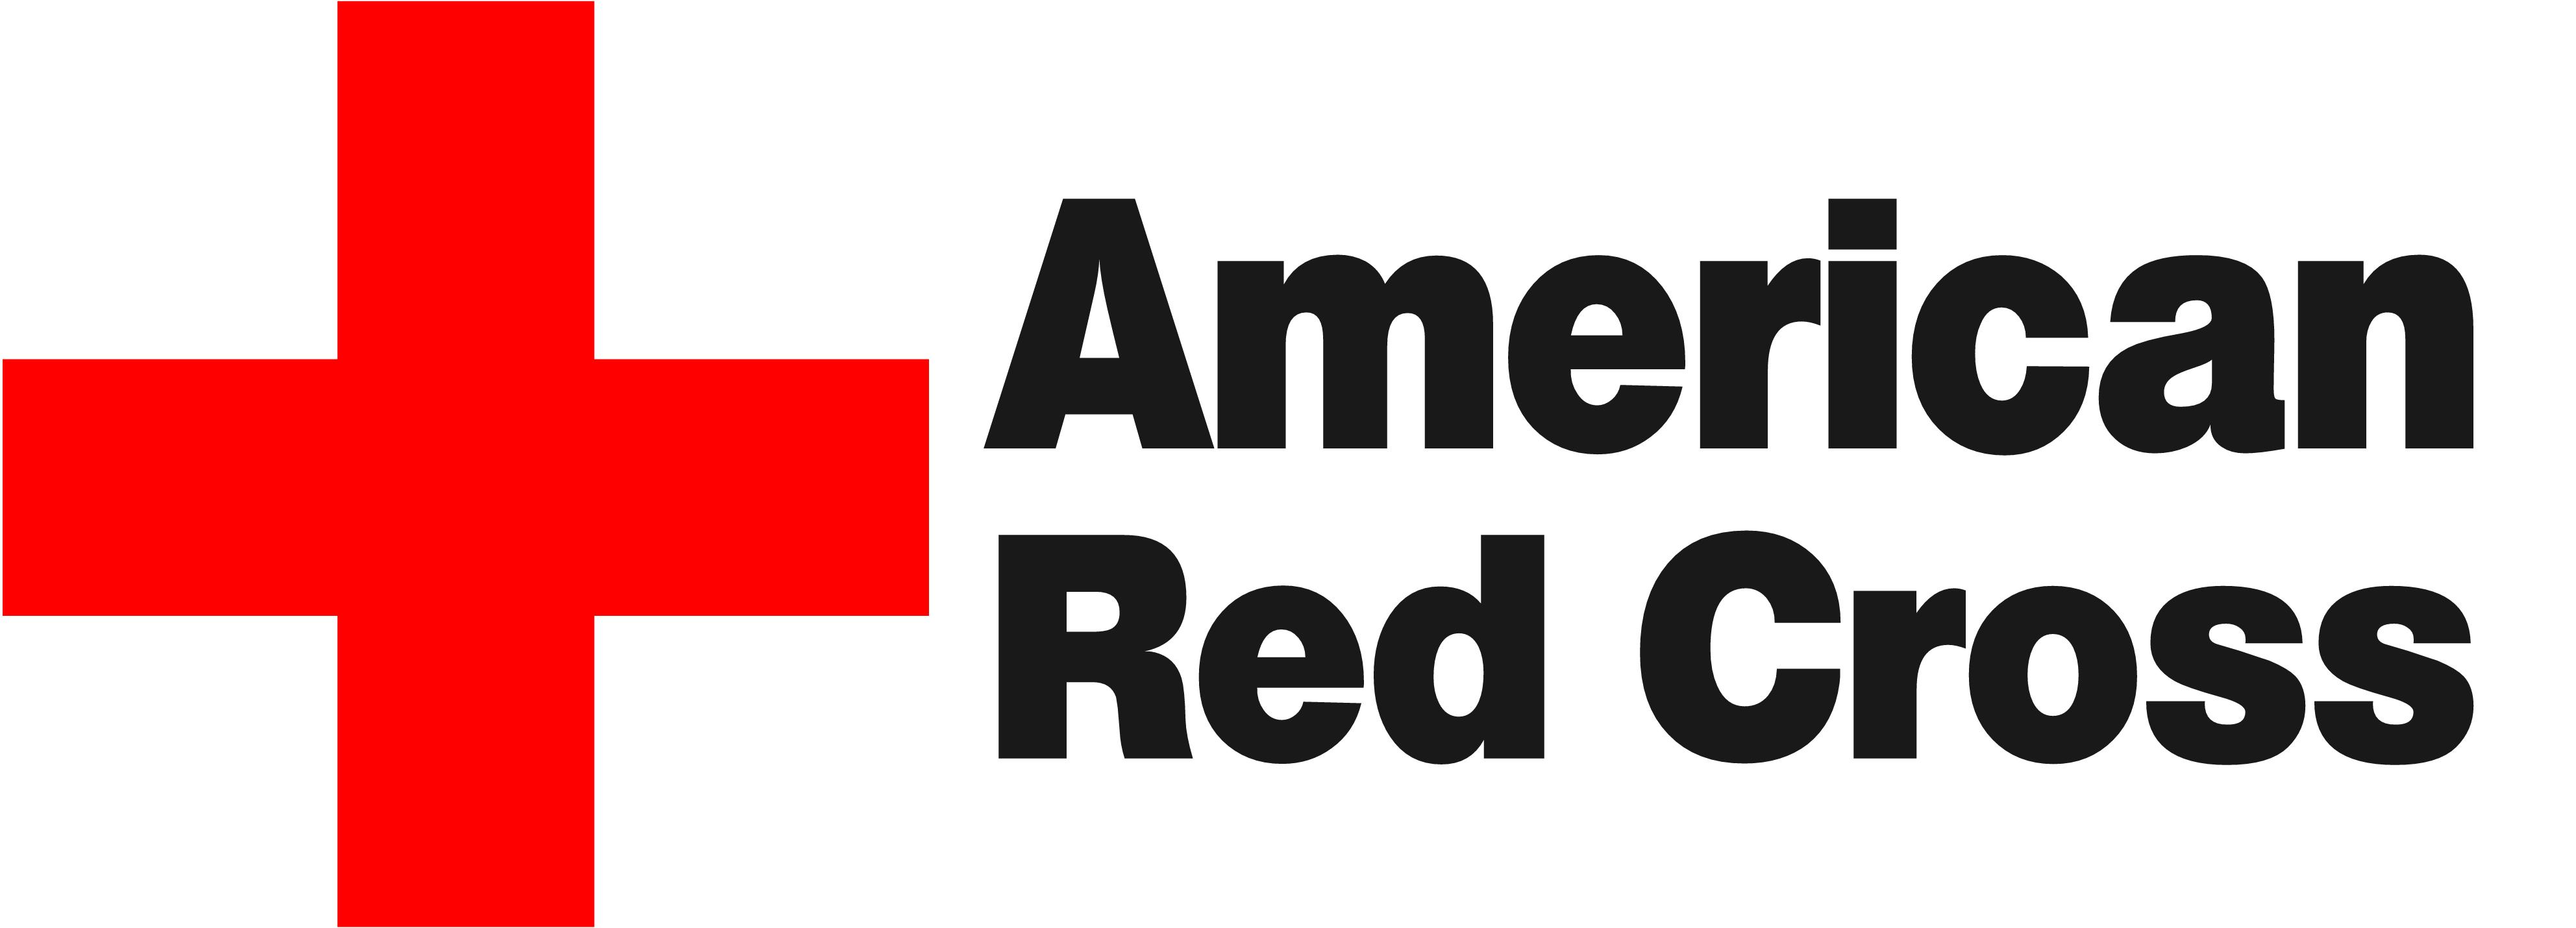 Concord, American Red Cross Sponsor Community Blood Drive on Sept ...